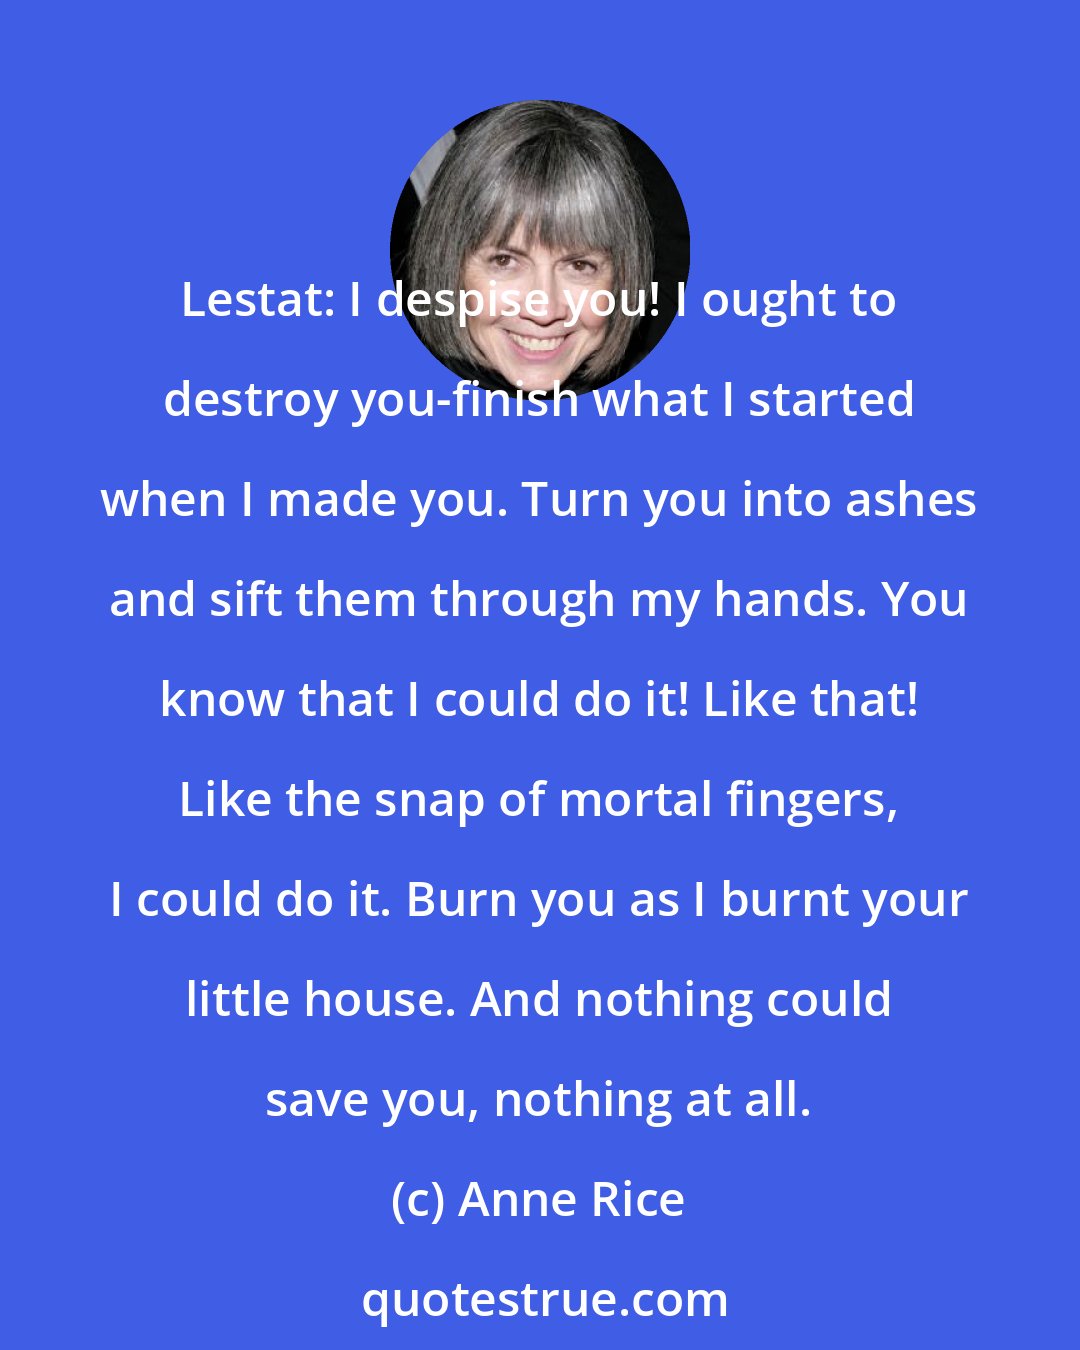 Anne Rice: Lestat: I despise you! I ought to destroy you-finish what I started when I made you. Turn you into ashes and sift them through my hands. You know that I could do it! Like that! Like the snap of mortal fingers, I could do it. Burn you as I burnt your little house. And nothing could save you, nothing at all.